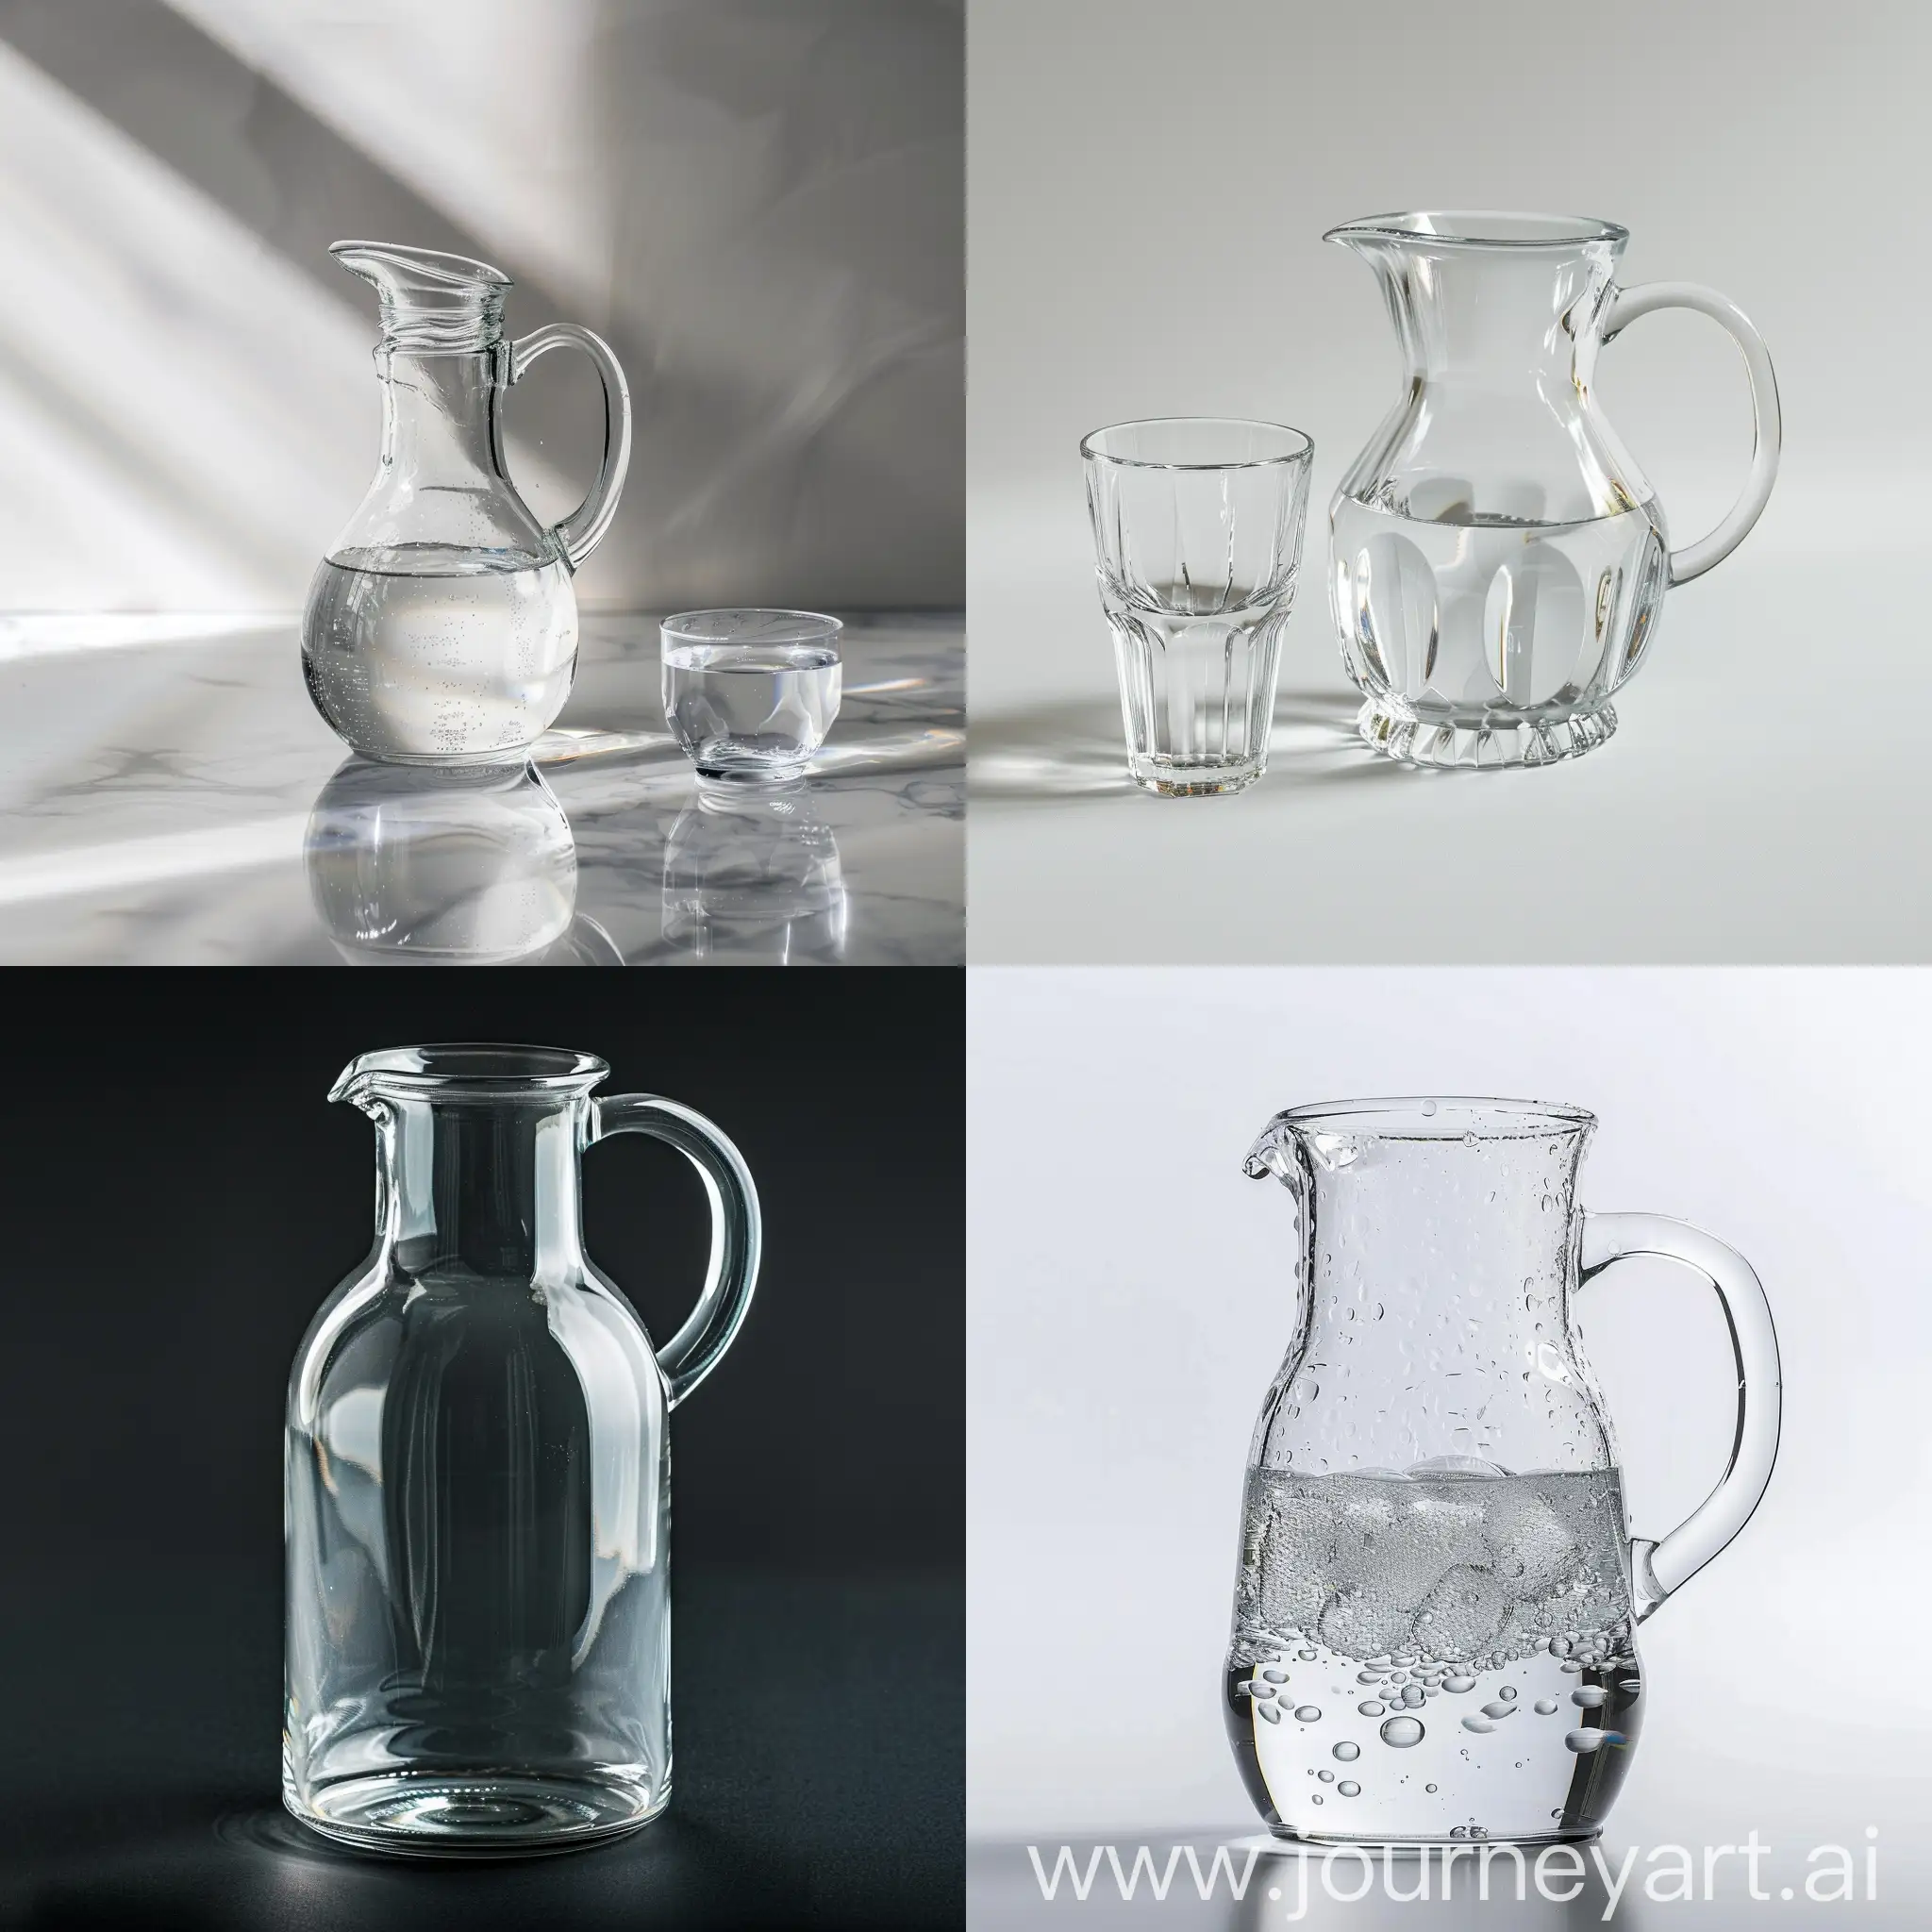 Crystal-Clear-Water-Display-in-Glass-Bottle-and-Pitcher